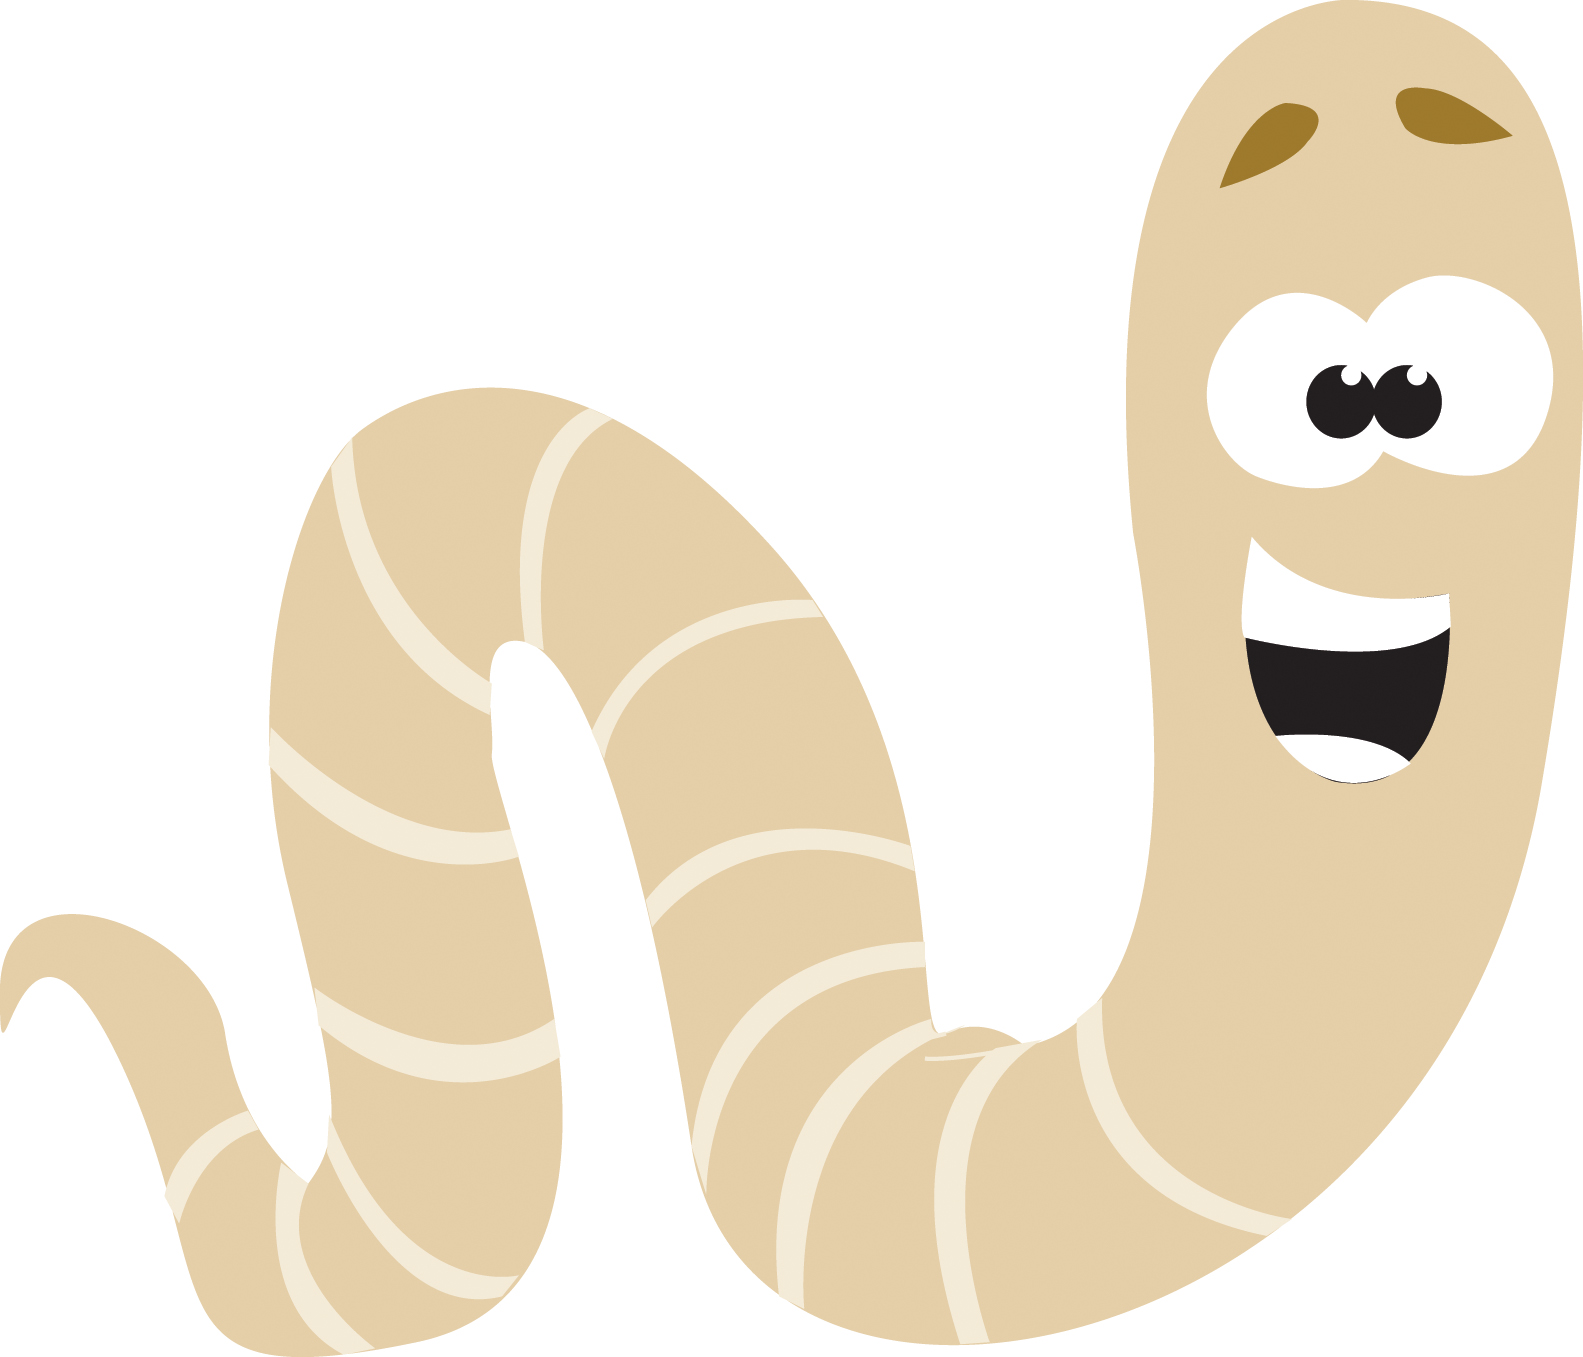 Worms In A Jar Clipart